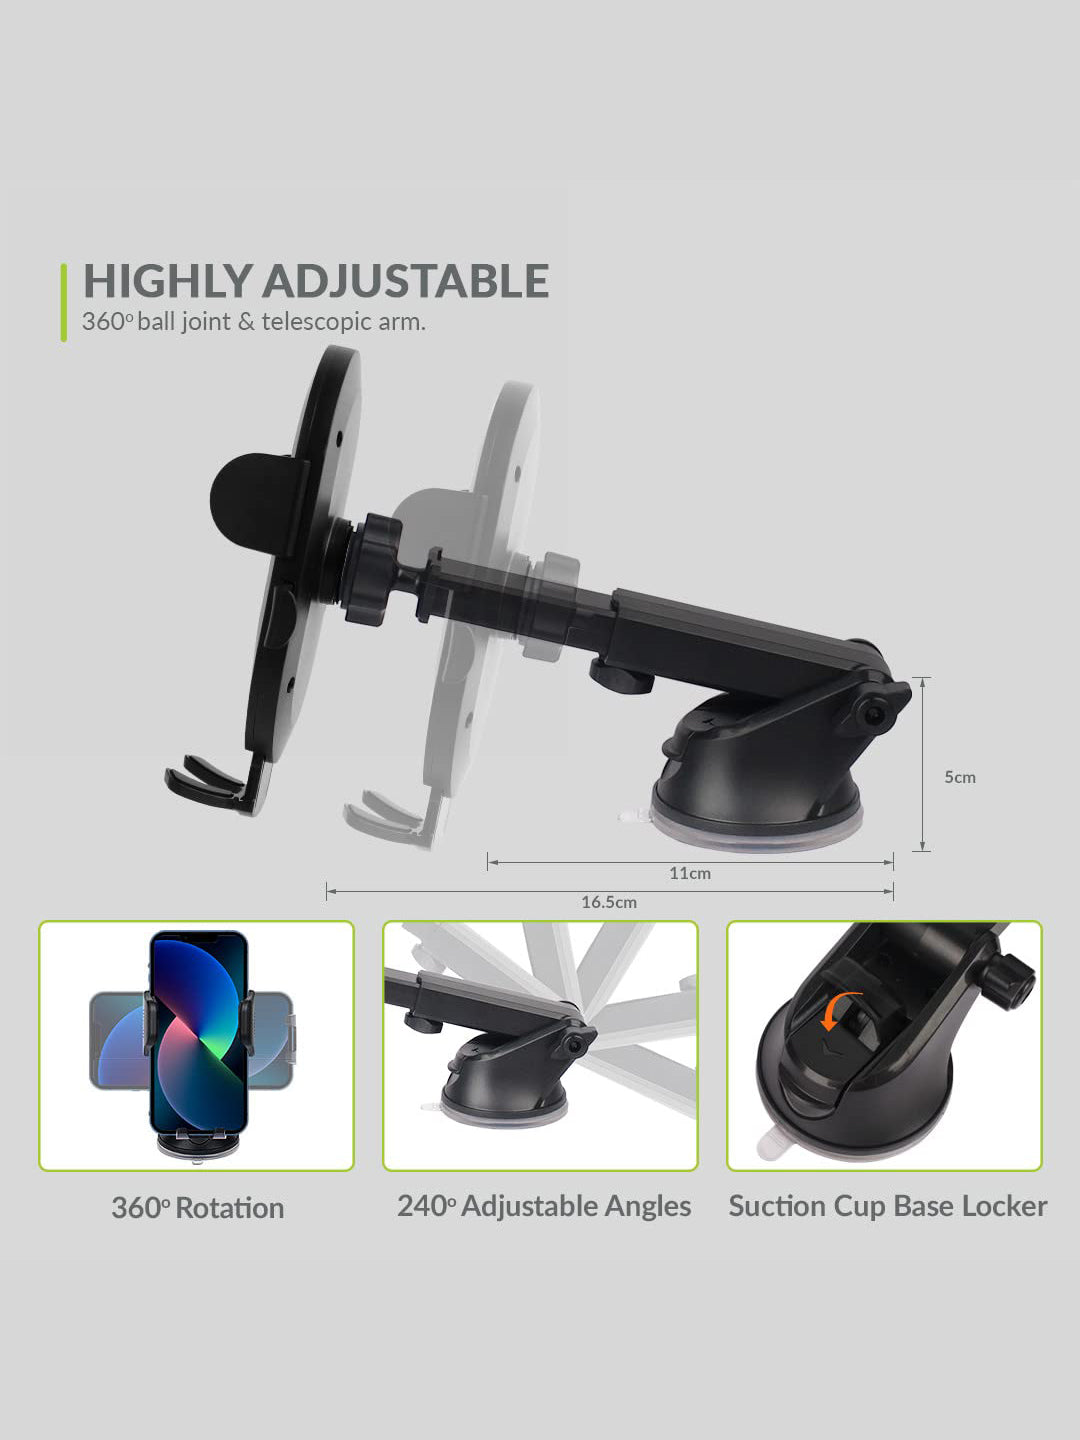 Universal Car Mobile Holder Stand